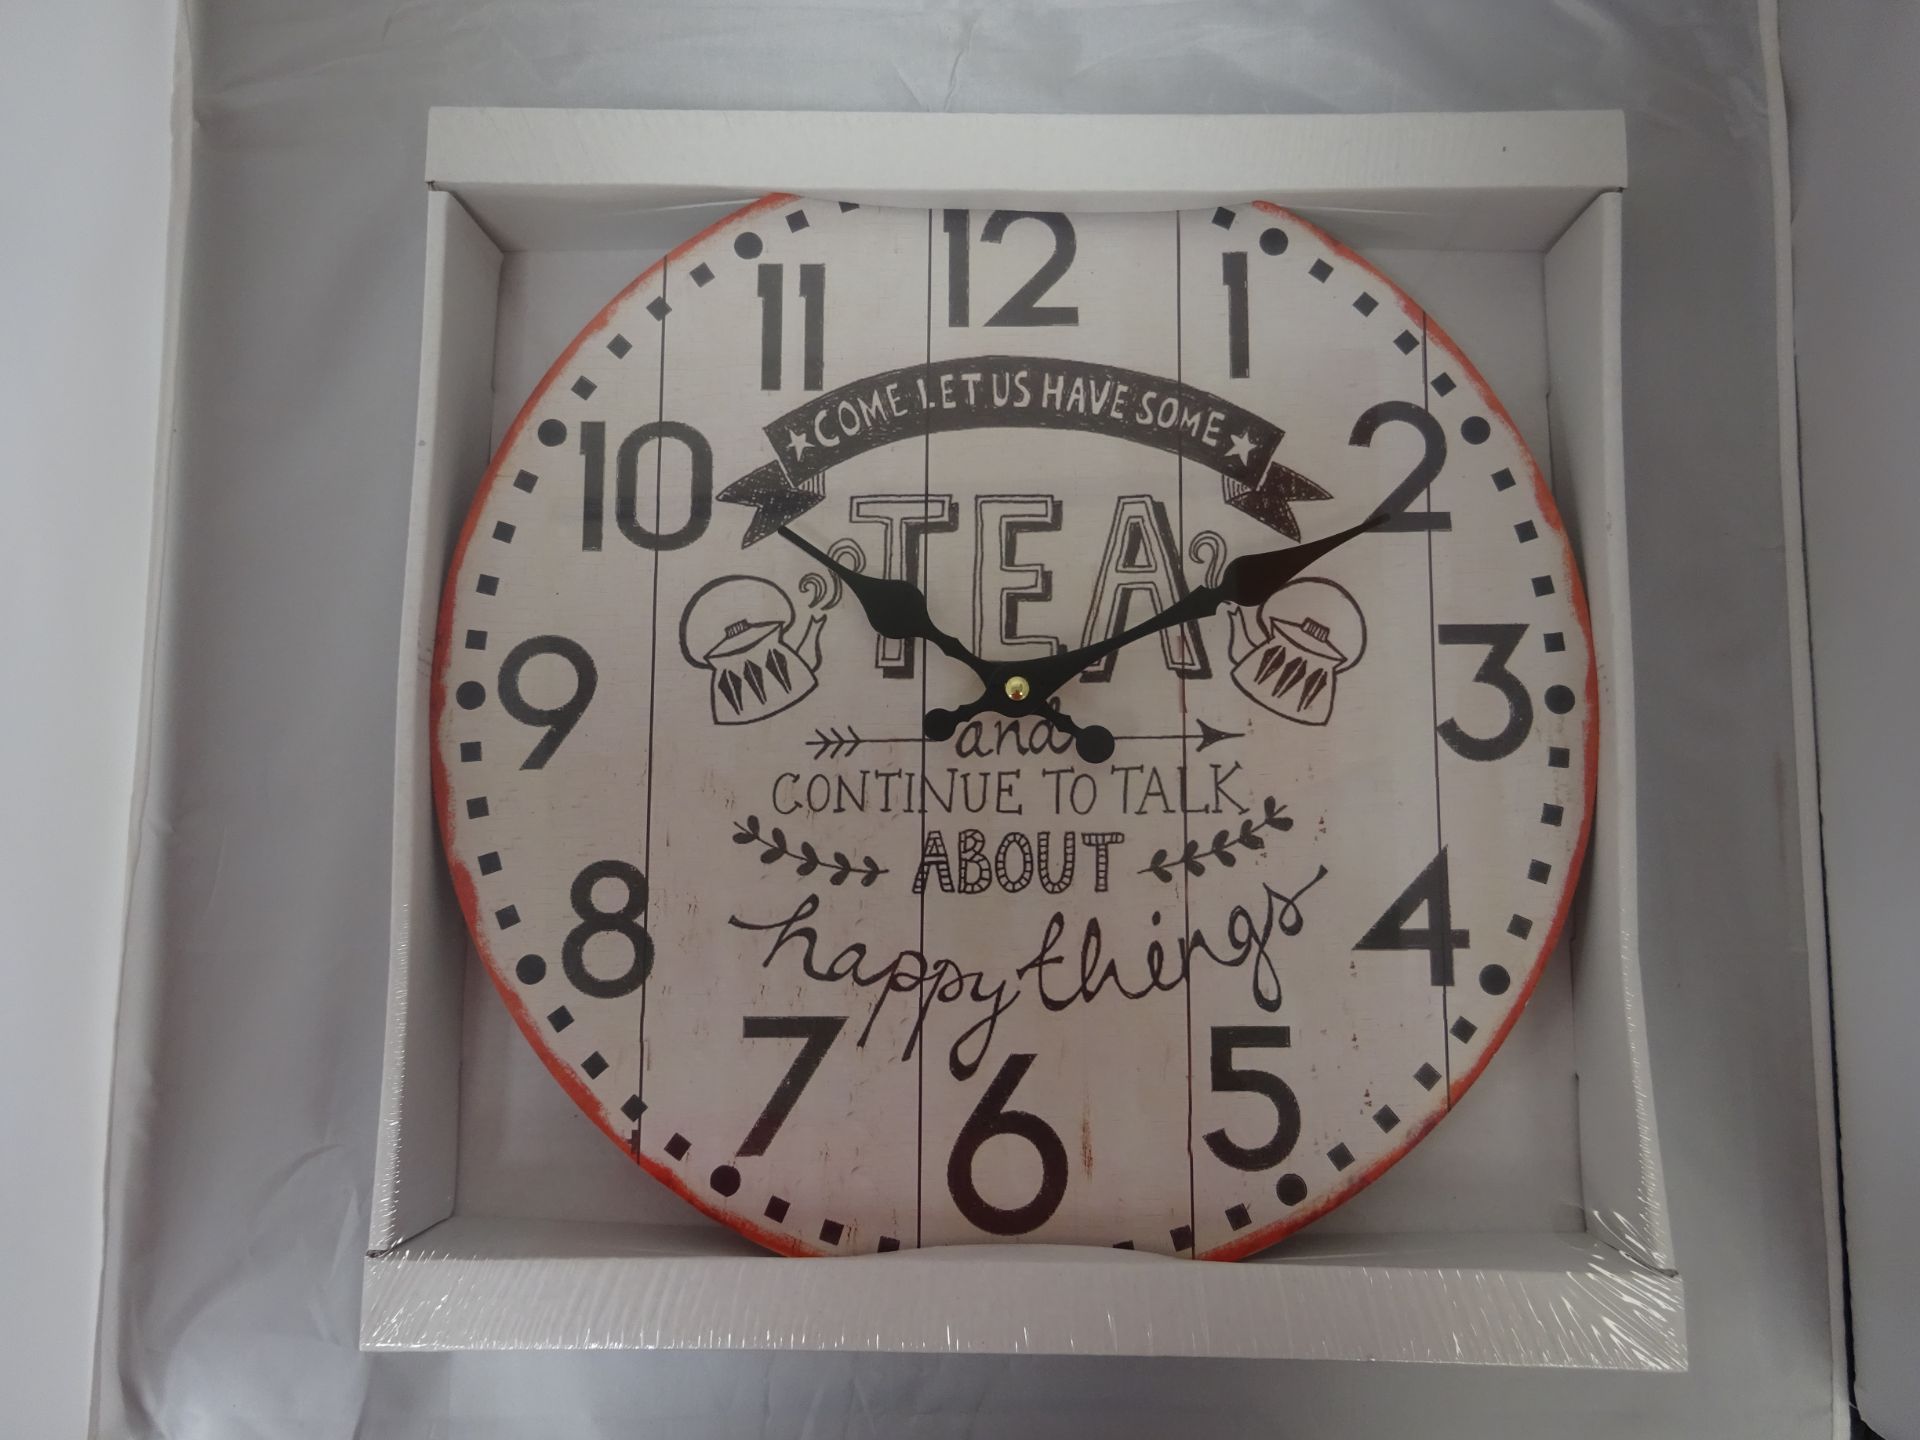 New Let us Have Some Tea Wall Clock in Original Packaging - Image 2 of 2